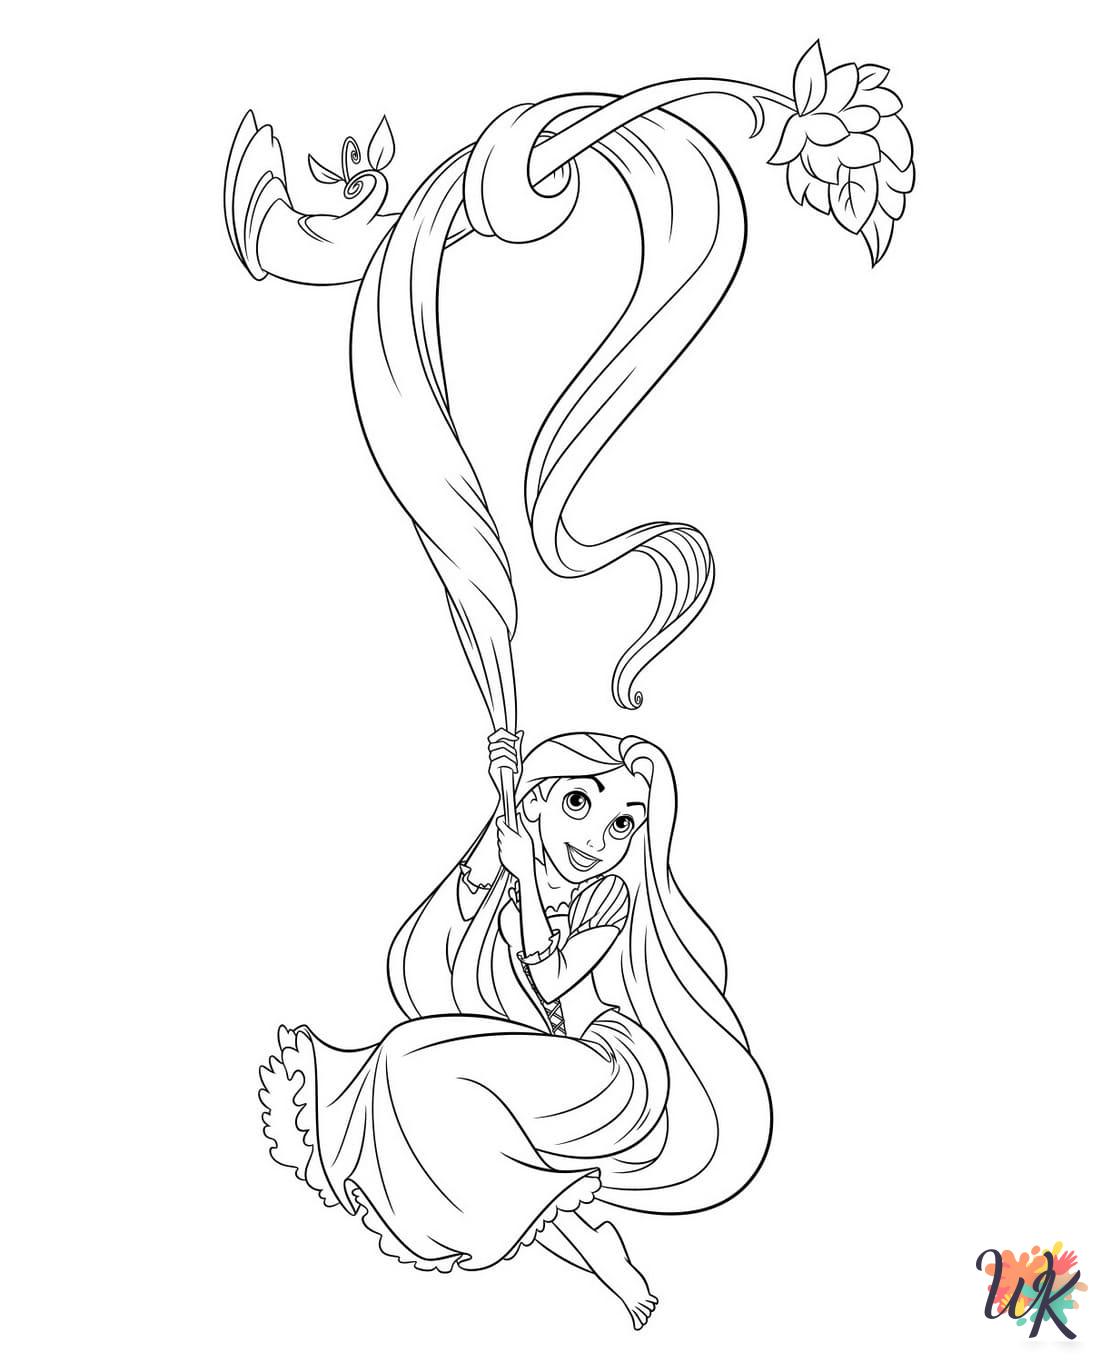 kawaii cute Tangled coloring pages